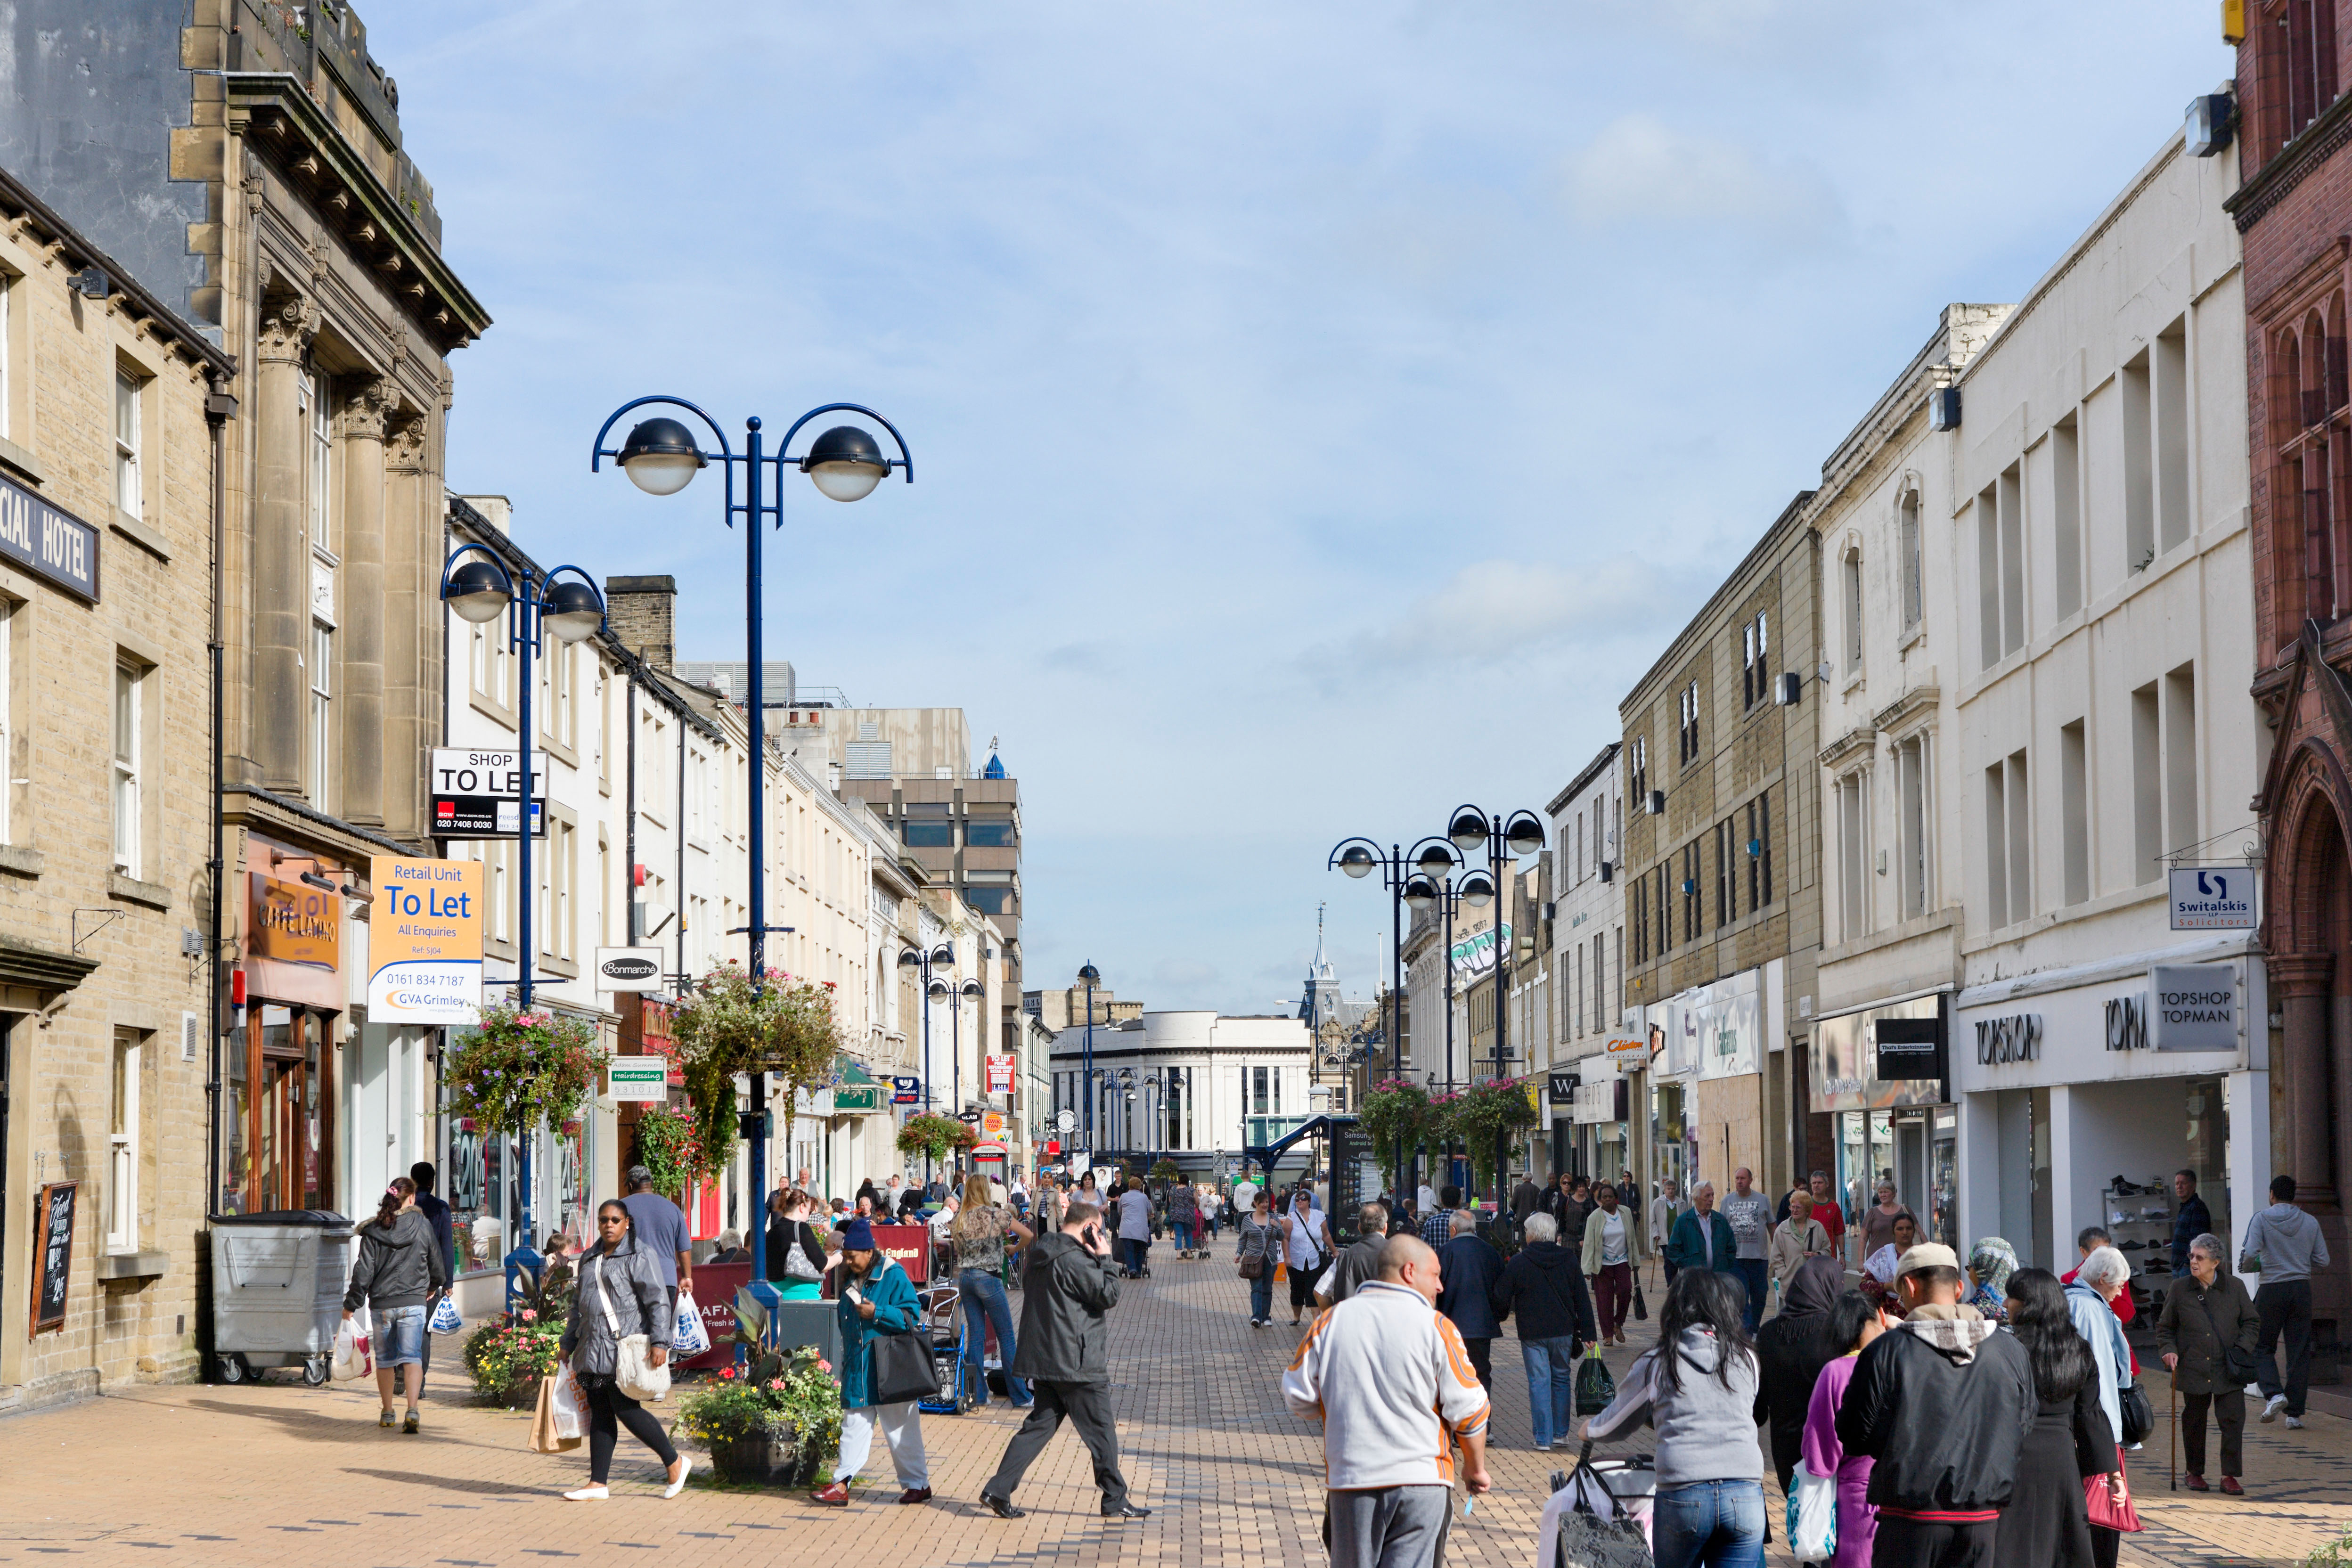 Image of a High Street in England